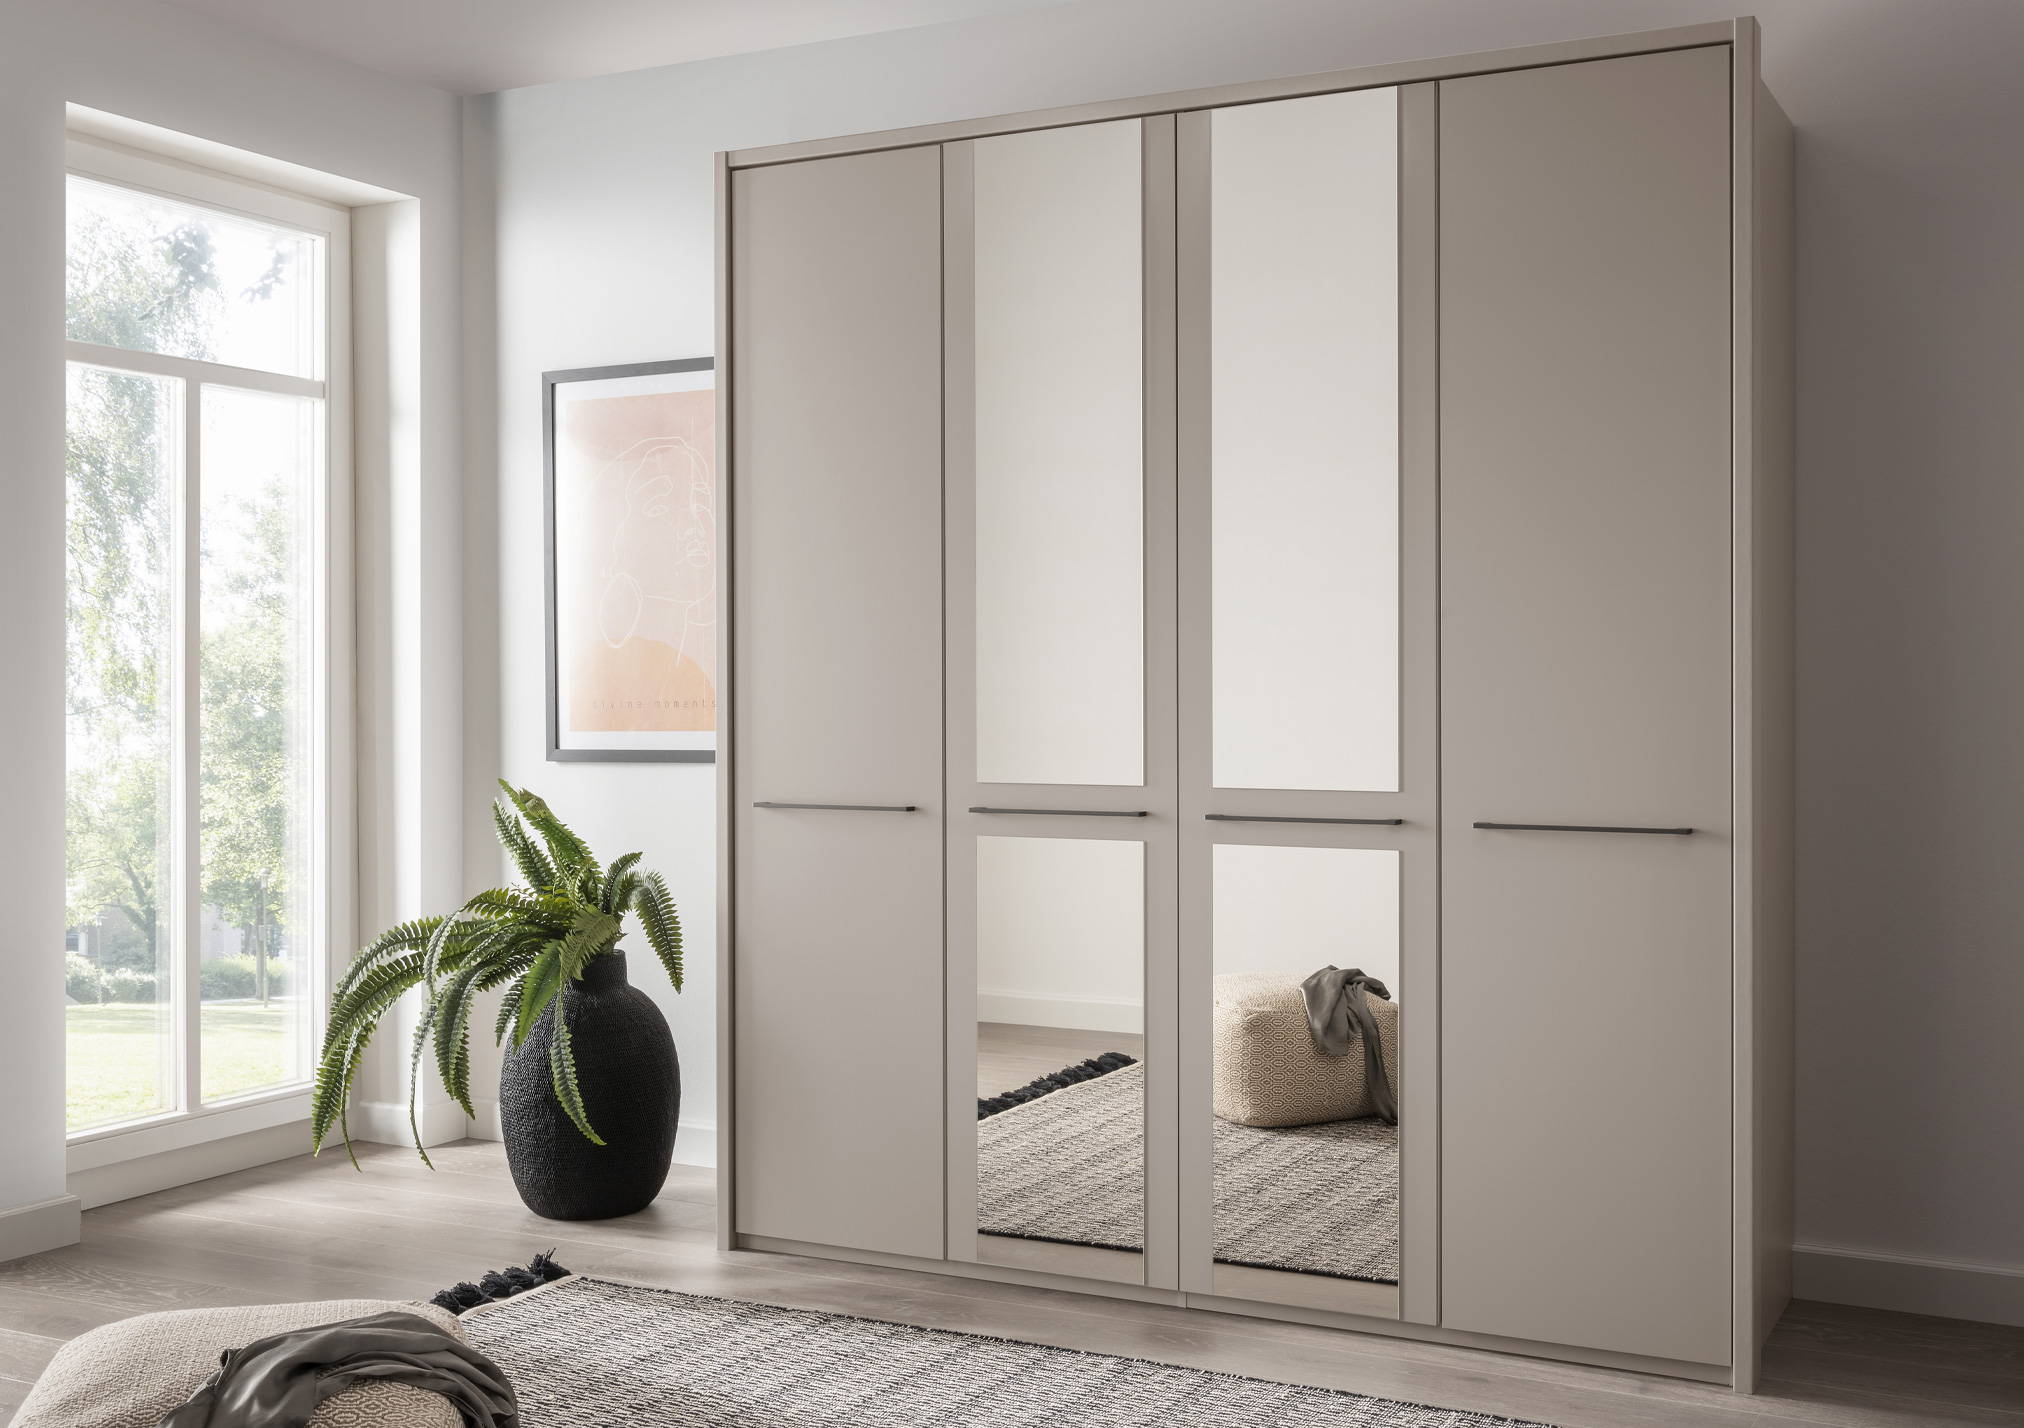 Modern Wardrobes For Contemporary Houses - Style Your Bedroom At BF Home